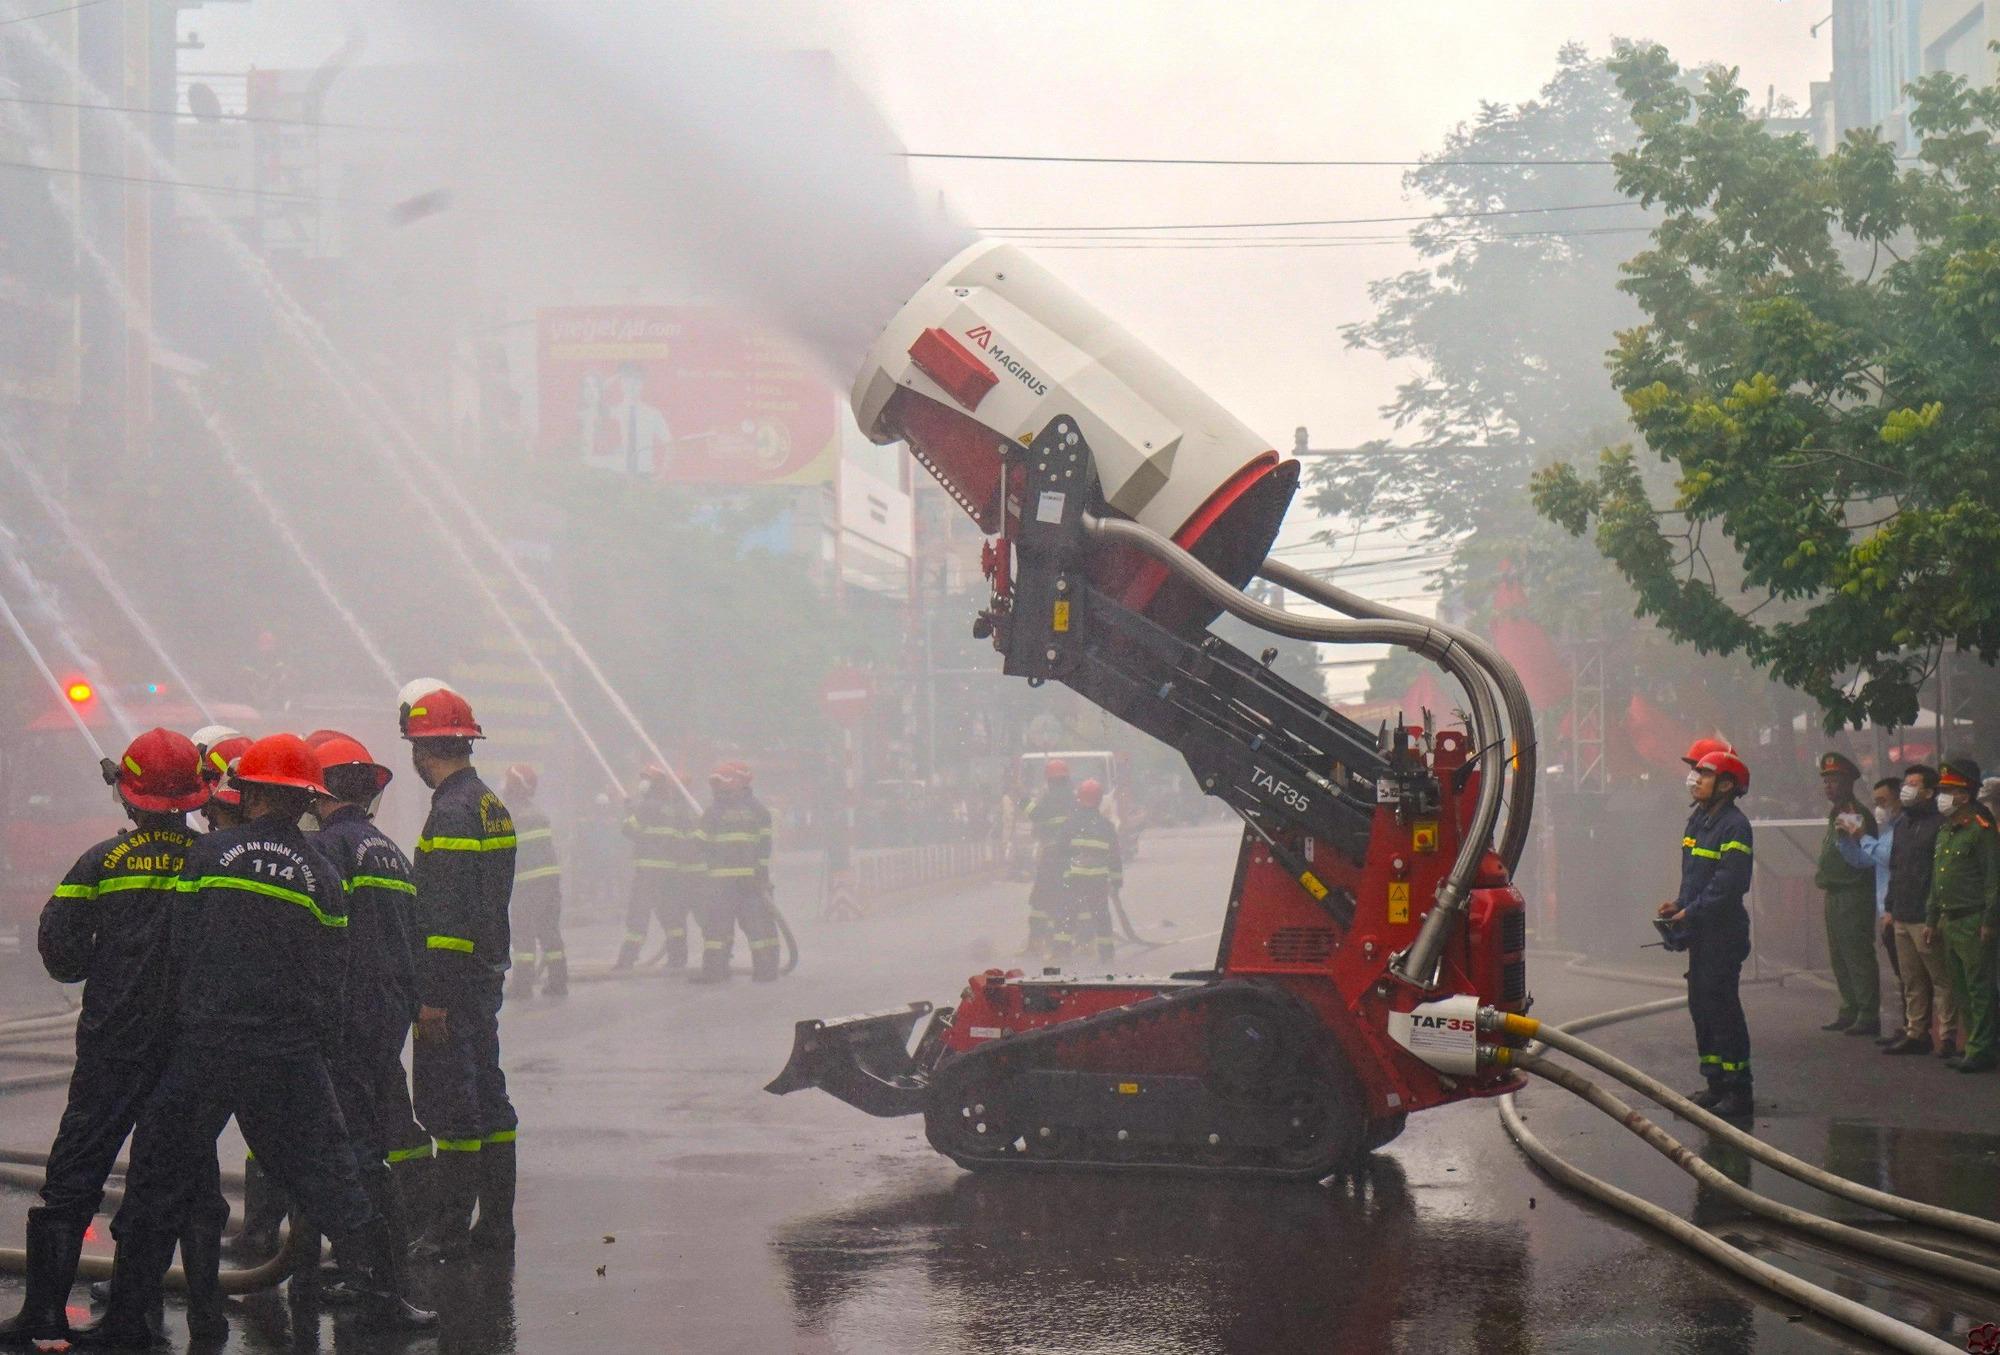 This kind of firefighting robot is able to work in various weather conditions and assist firefighters in quickly approaching the scene of a fire. Photo: D.Thanh / Tuoi Tre